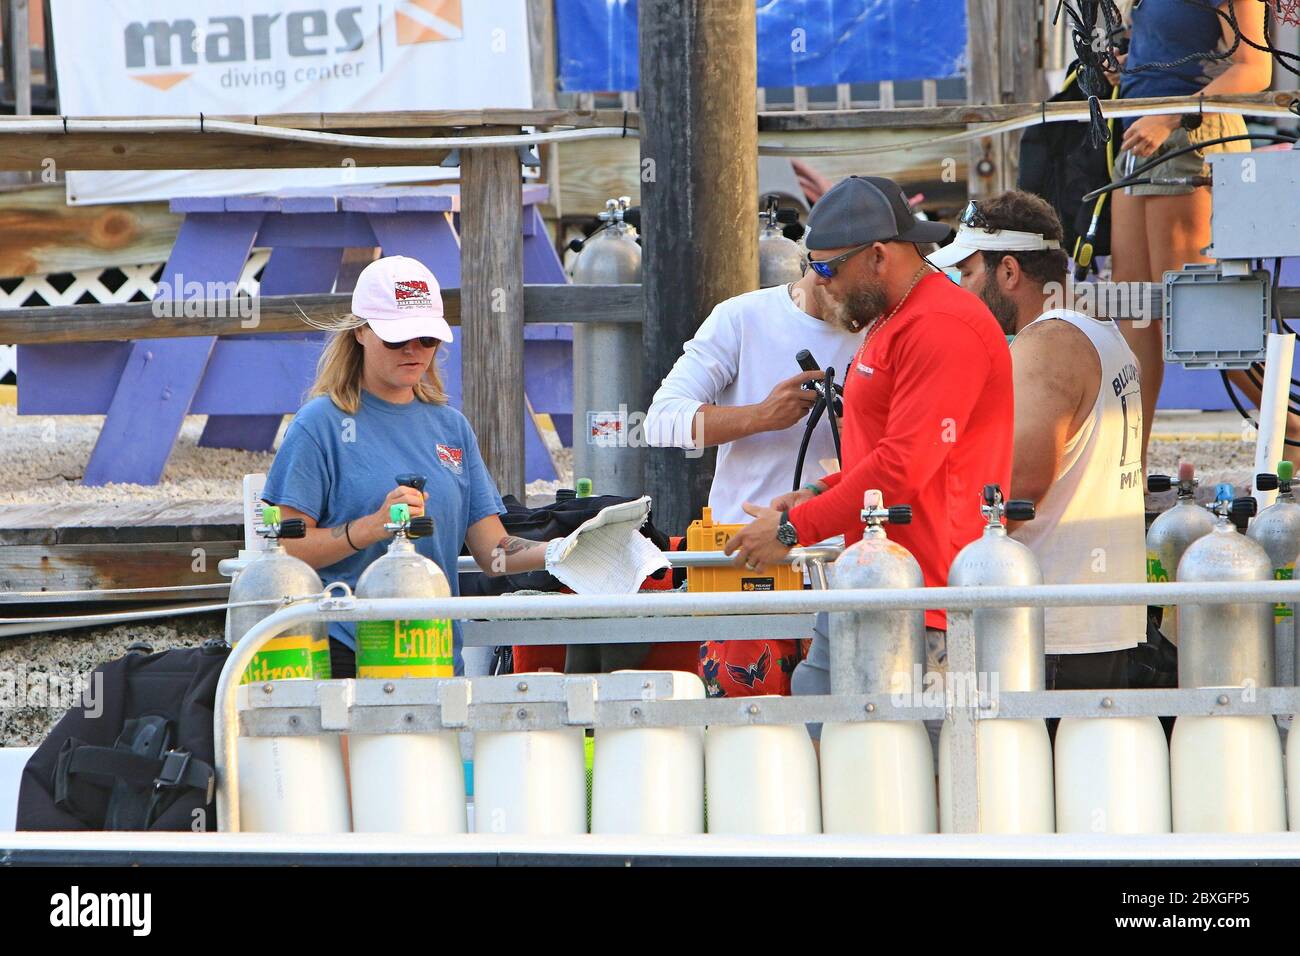 Key Largo, FL, 3/21/2020: Crew members are getting ready to take scuba divers out on their diving boat. Stock Photo